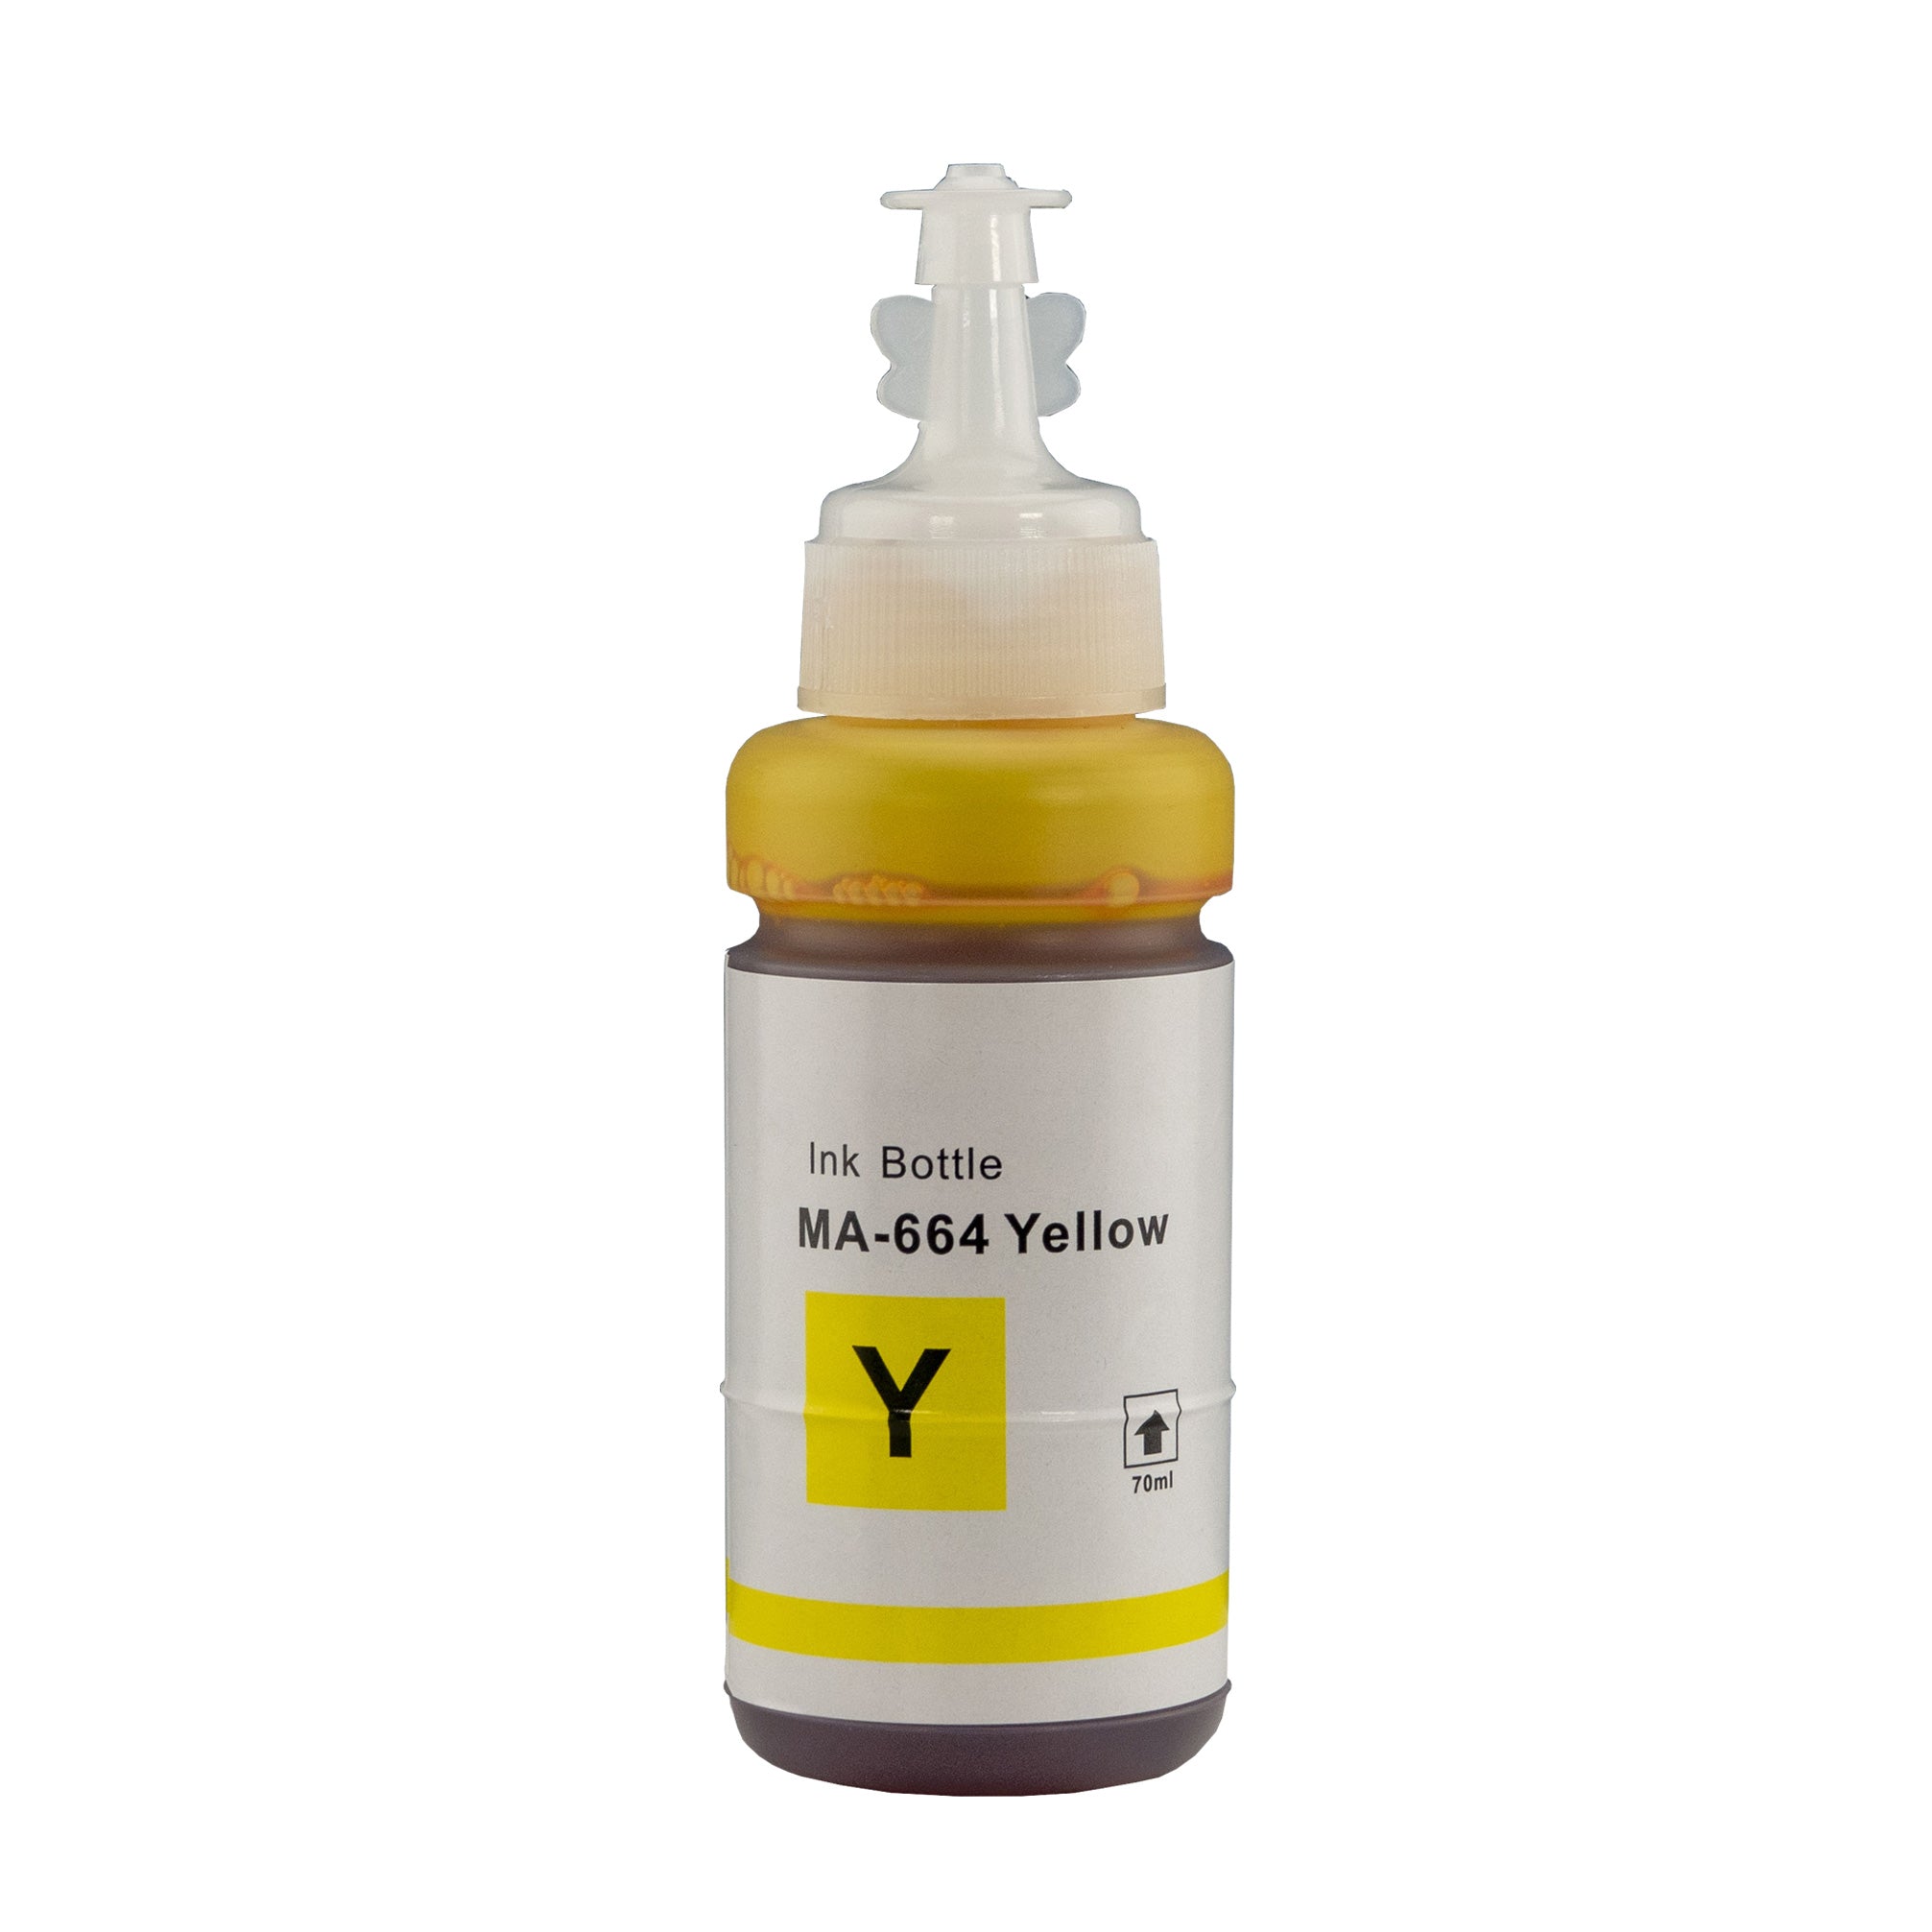 Compatible Refill Ink for Epson T664 ECO Tank Yellow ink Bottle